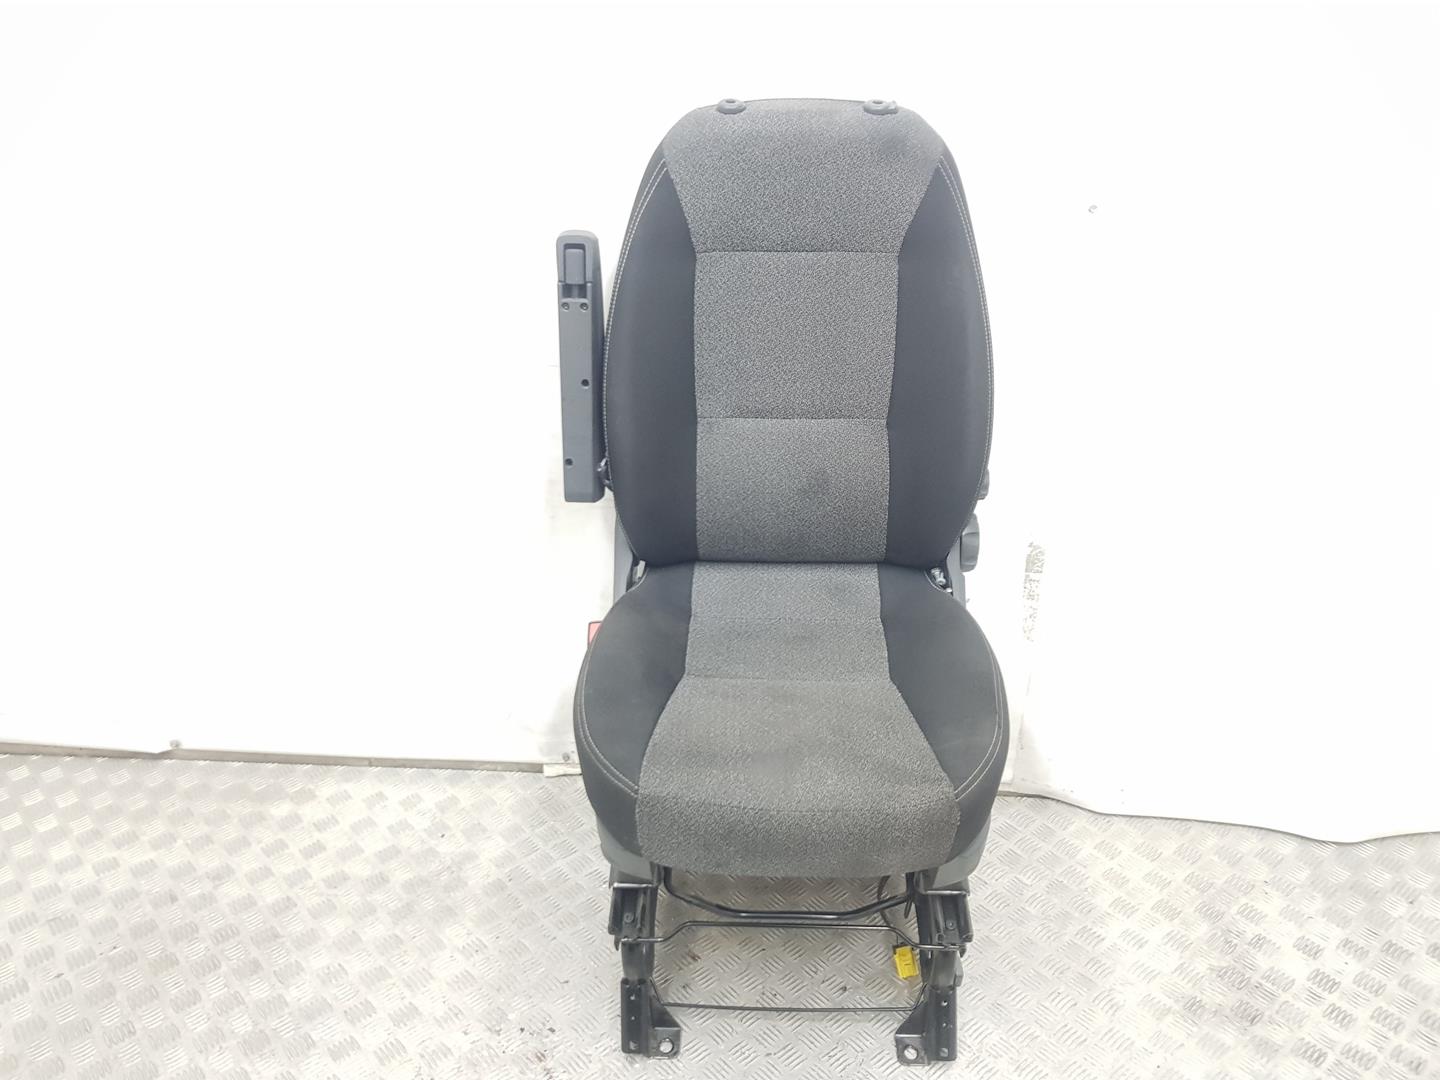 FIAT Ducato 1 generation (1996-2012) Front Left Seat ASIENTOTELA, ASIENTOCONDUCTOR 19822021